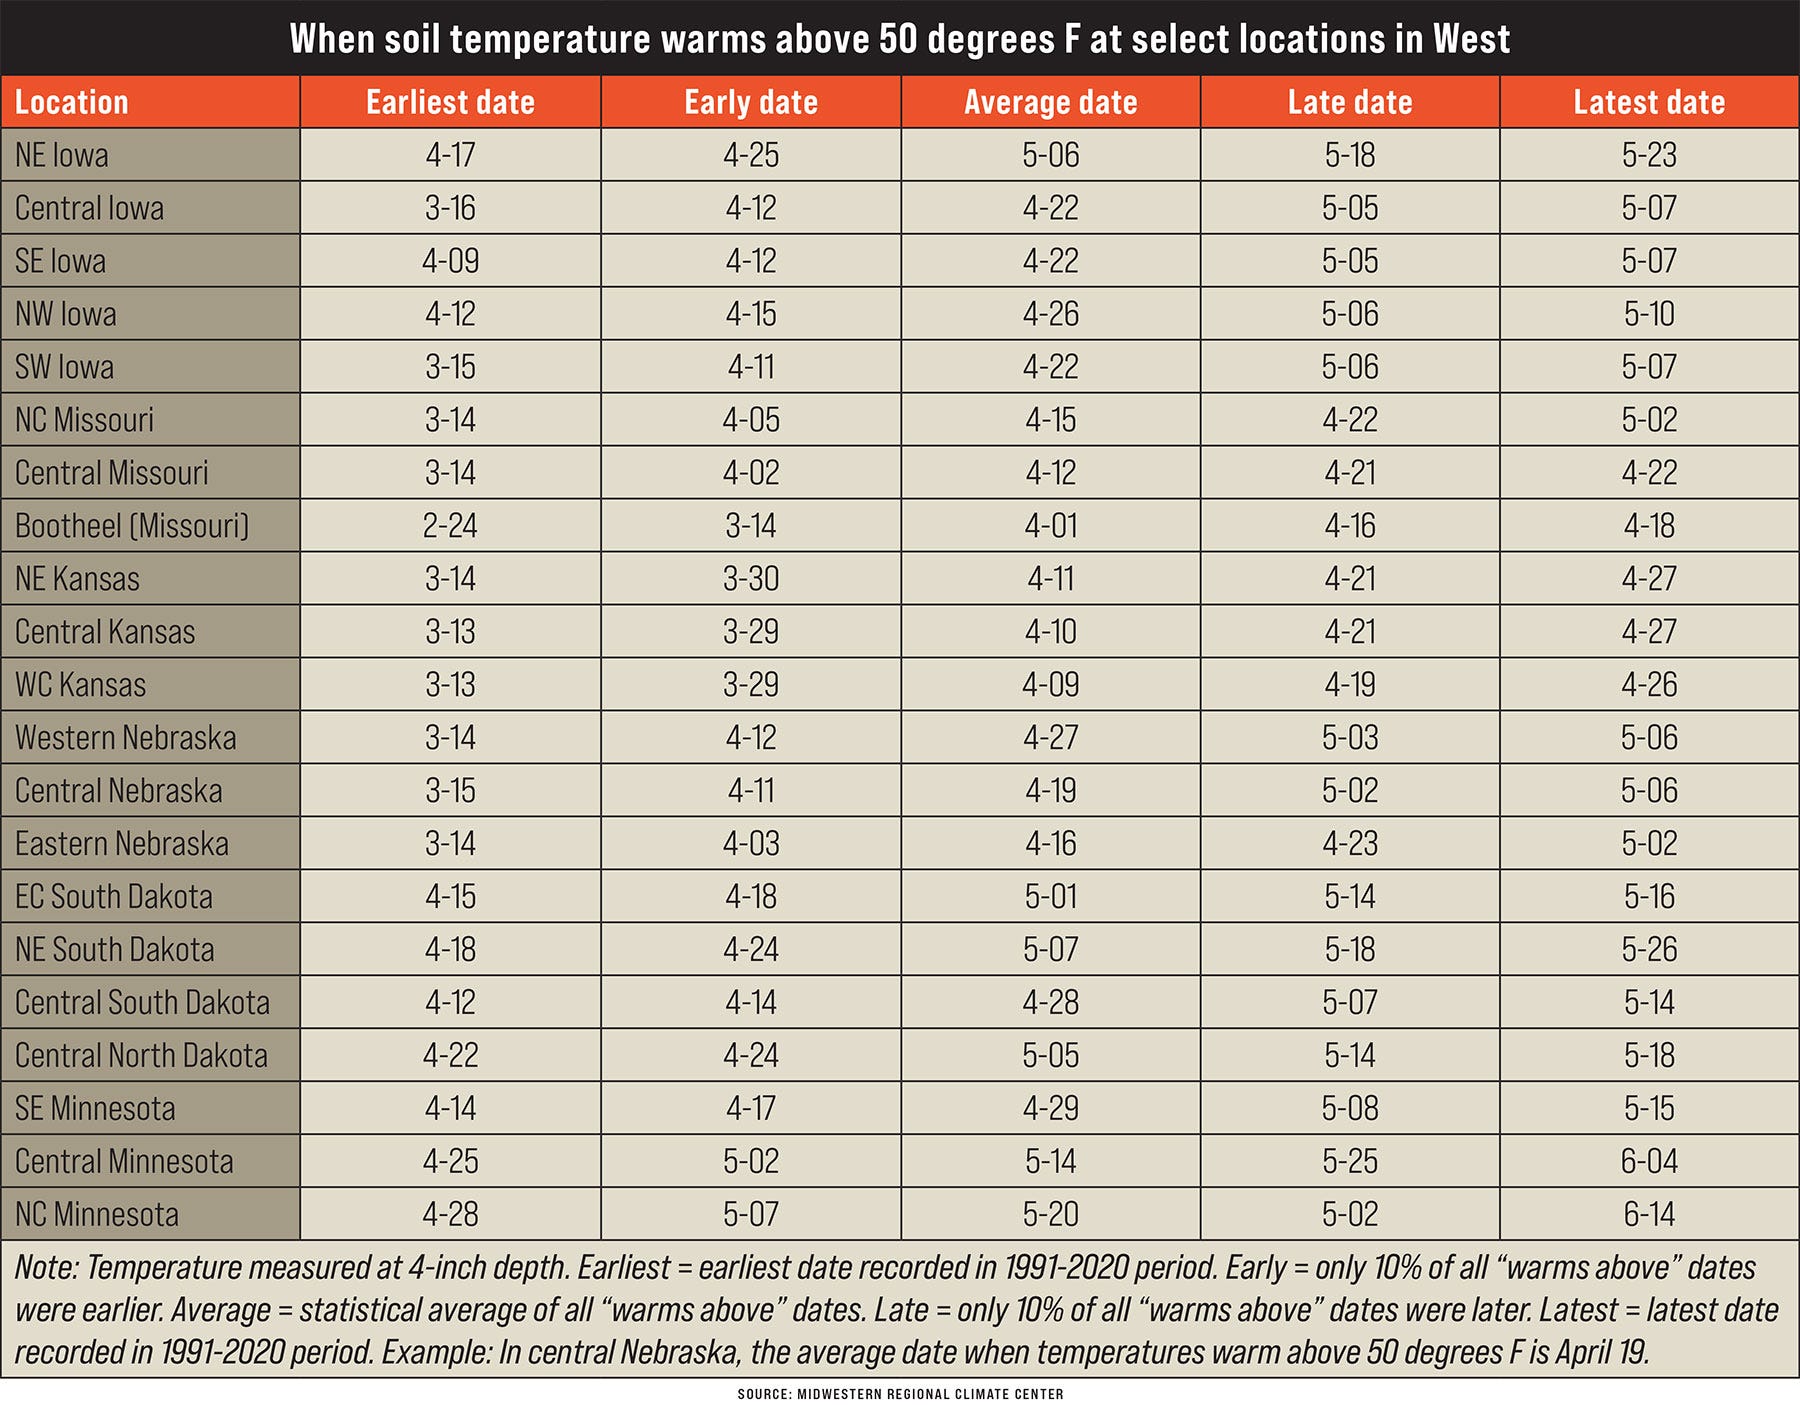 A graphic table detailing when soil temperature warms above 50 degrees F at select locations in West